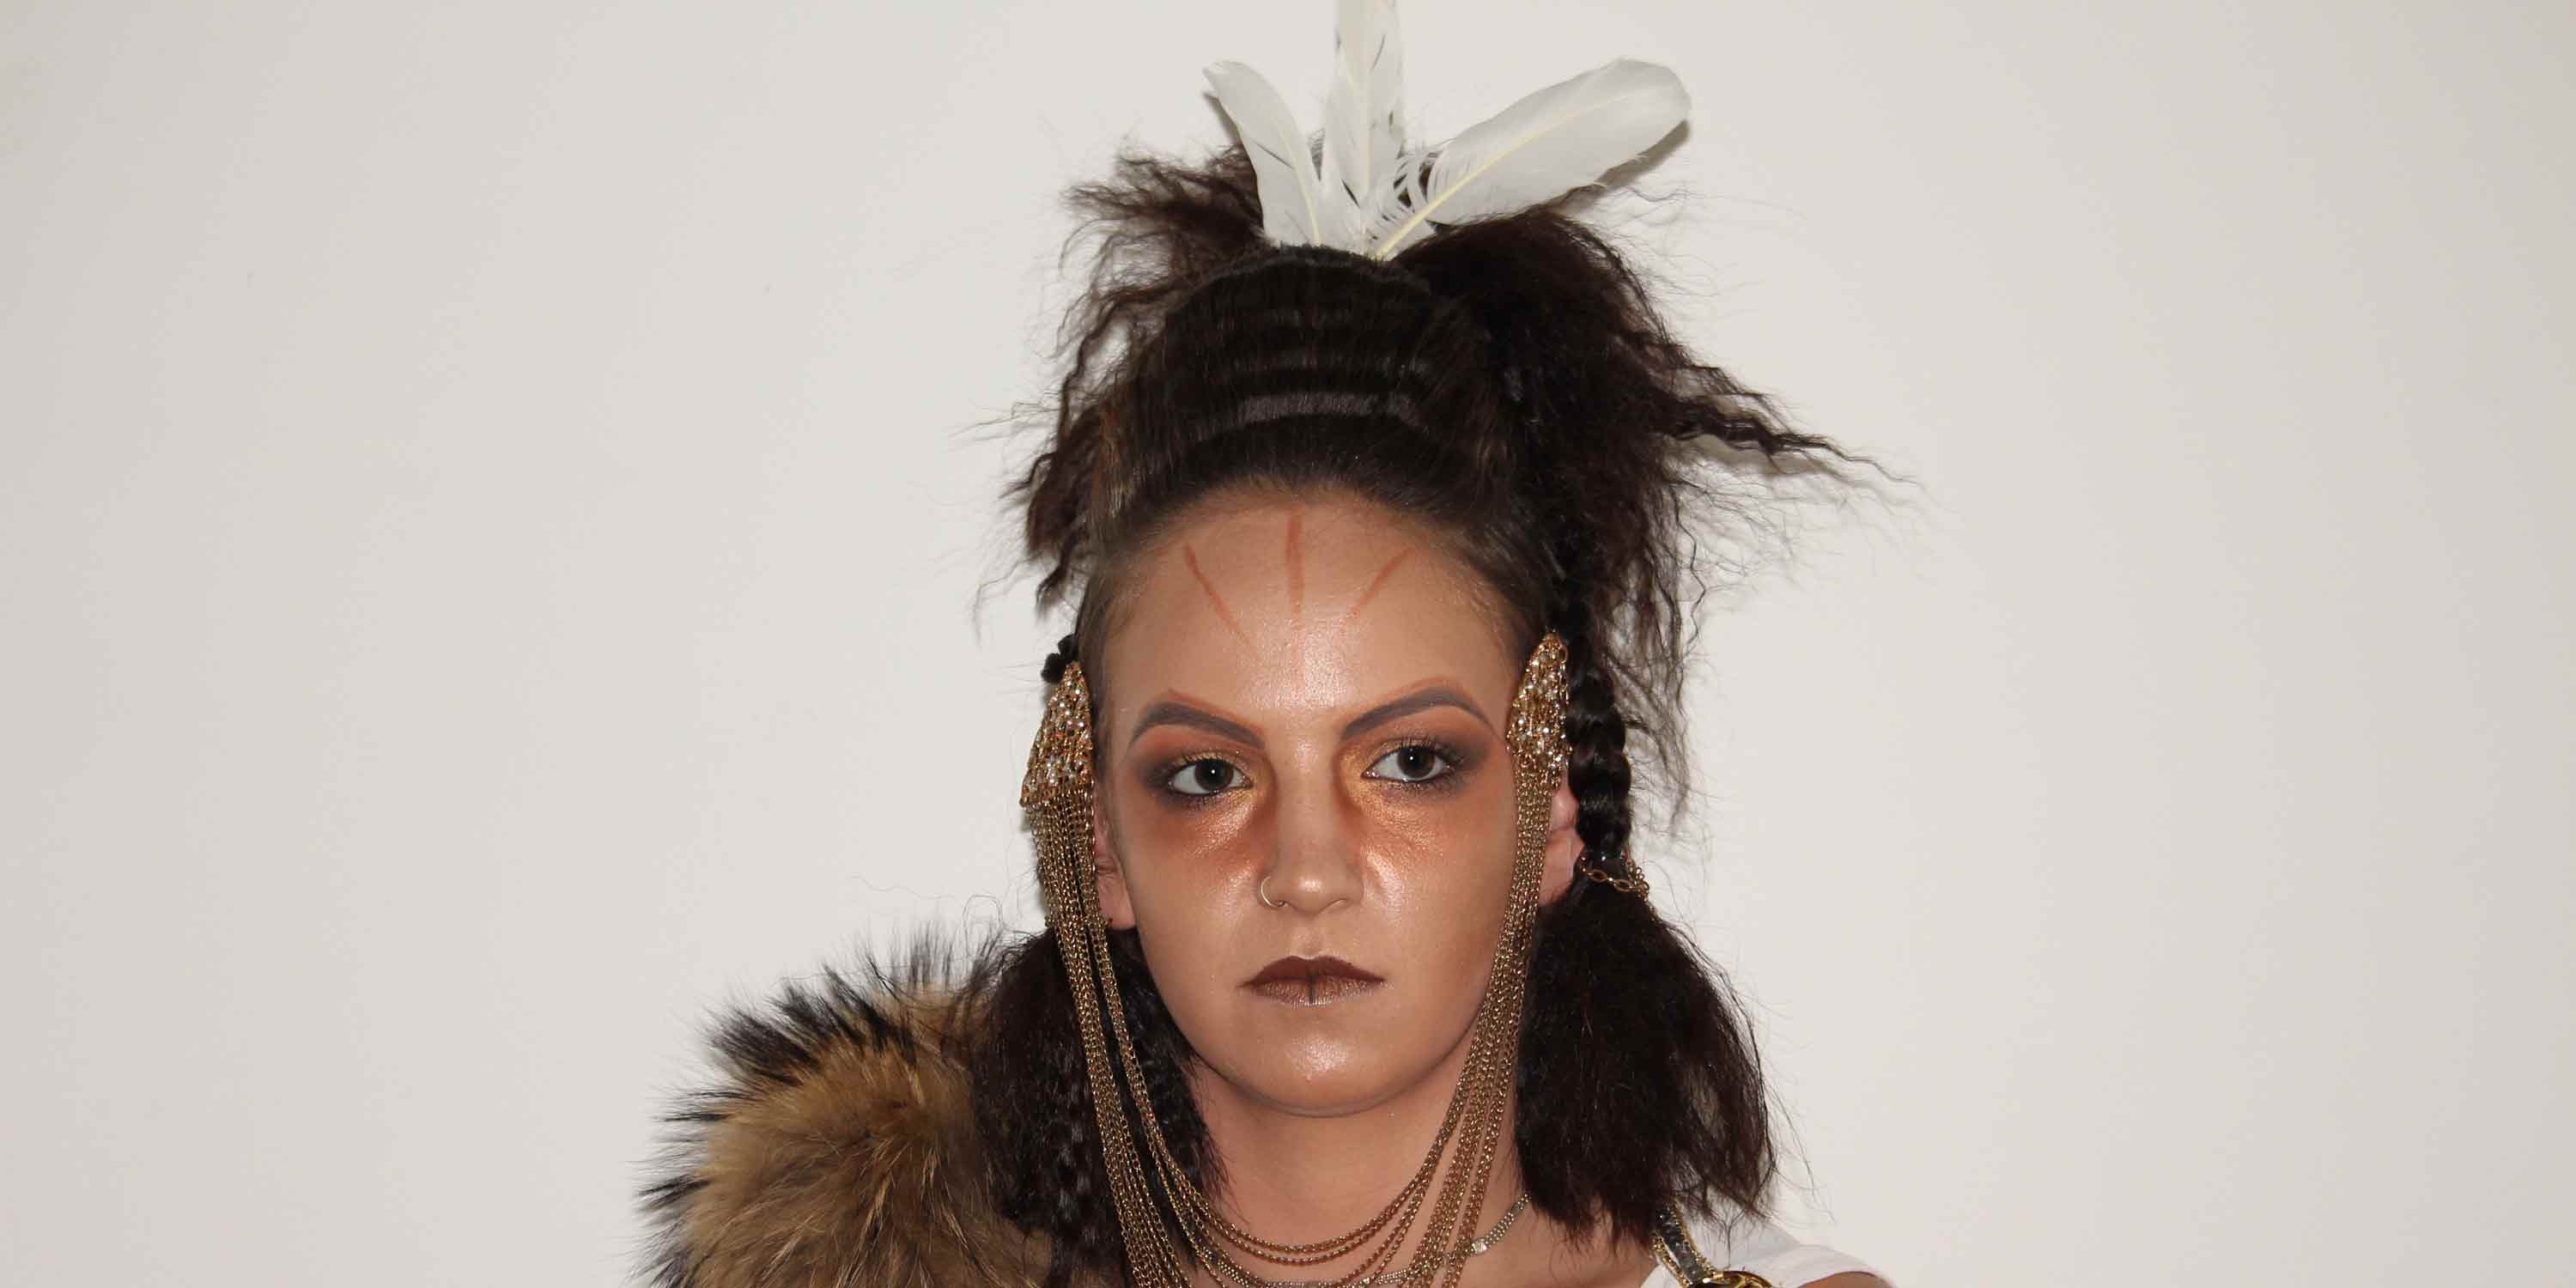 2018 NMIT Hairdressing Competitions Nelson Marlborough Institute of